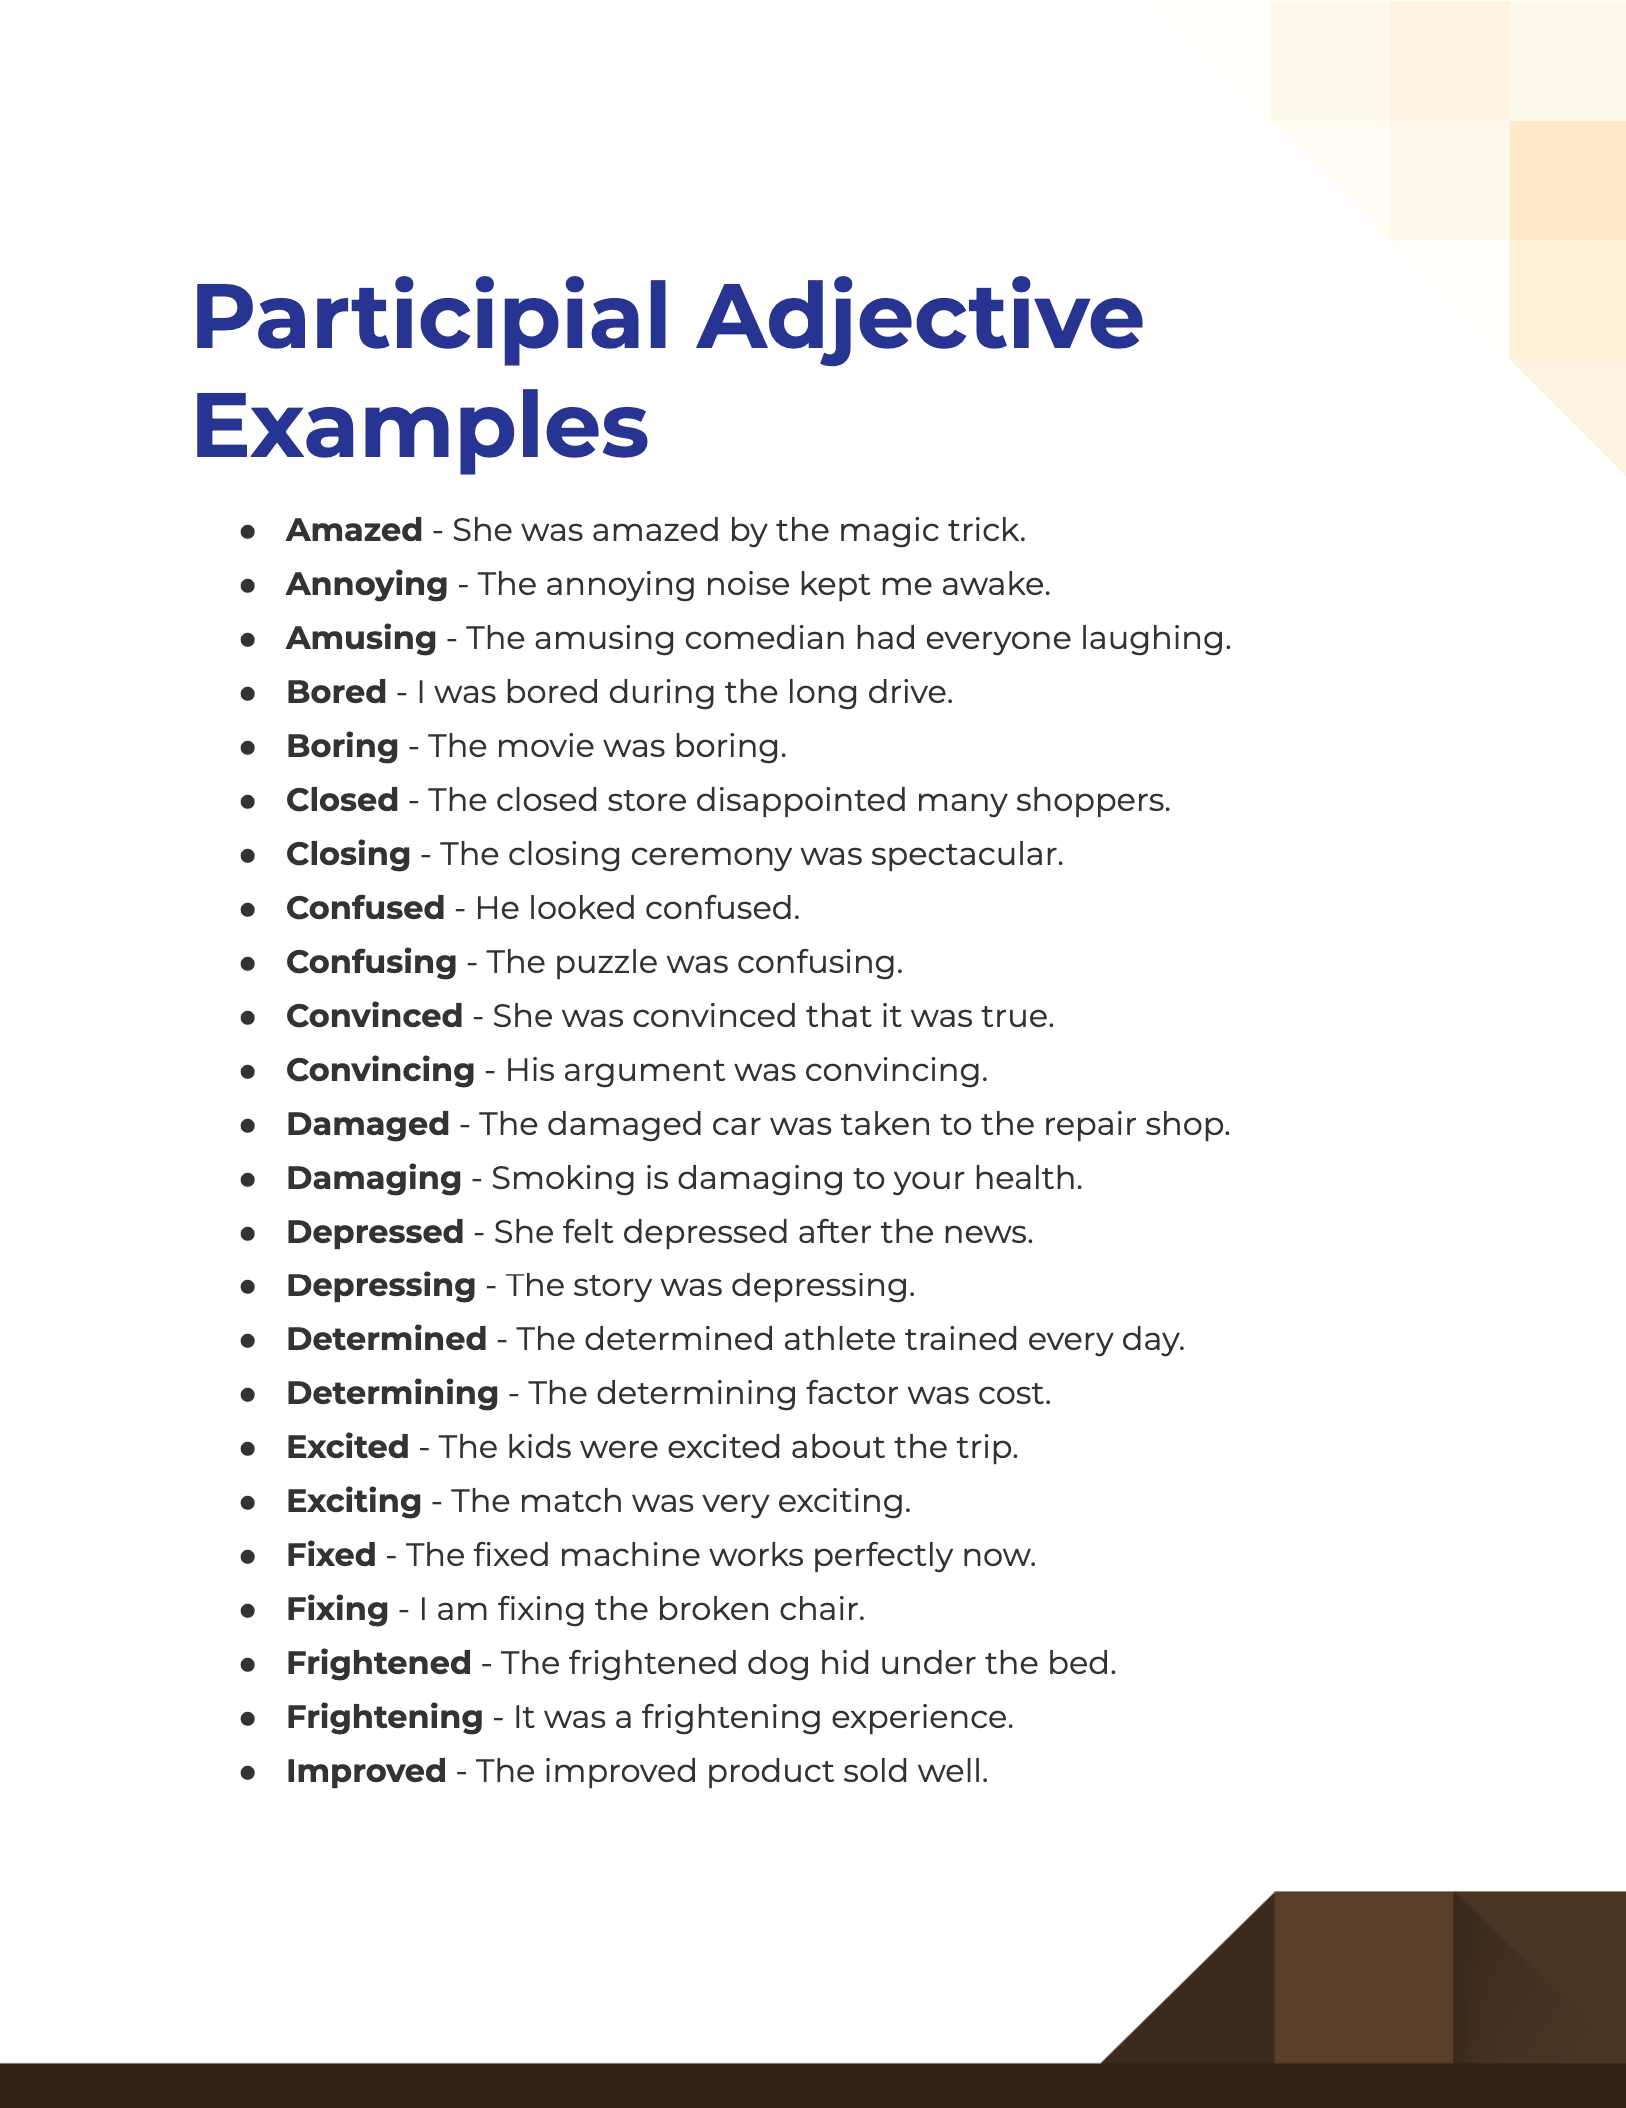 participial adjective examples1